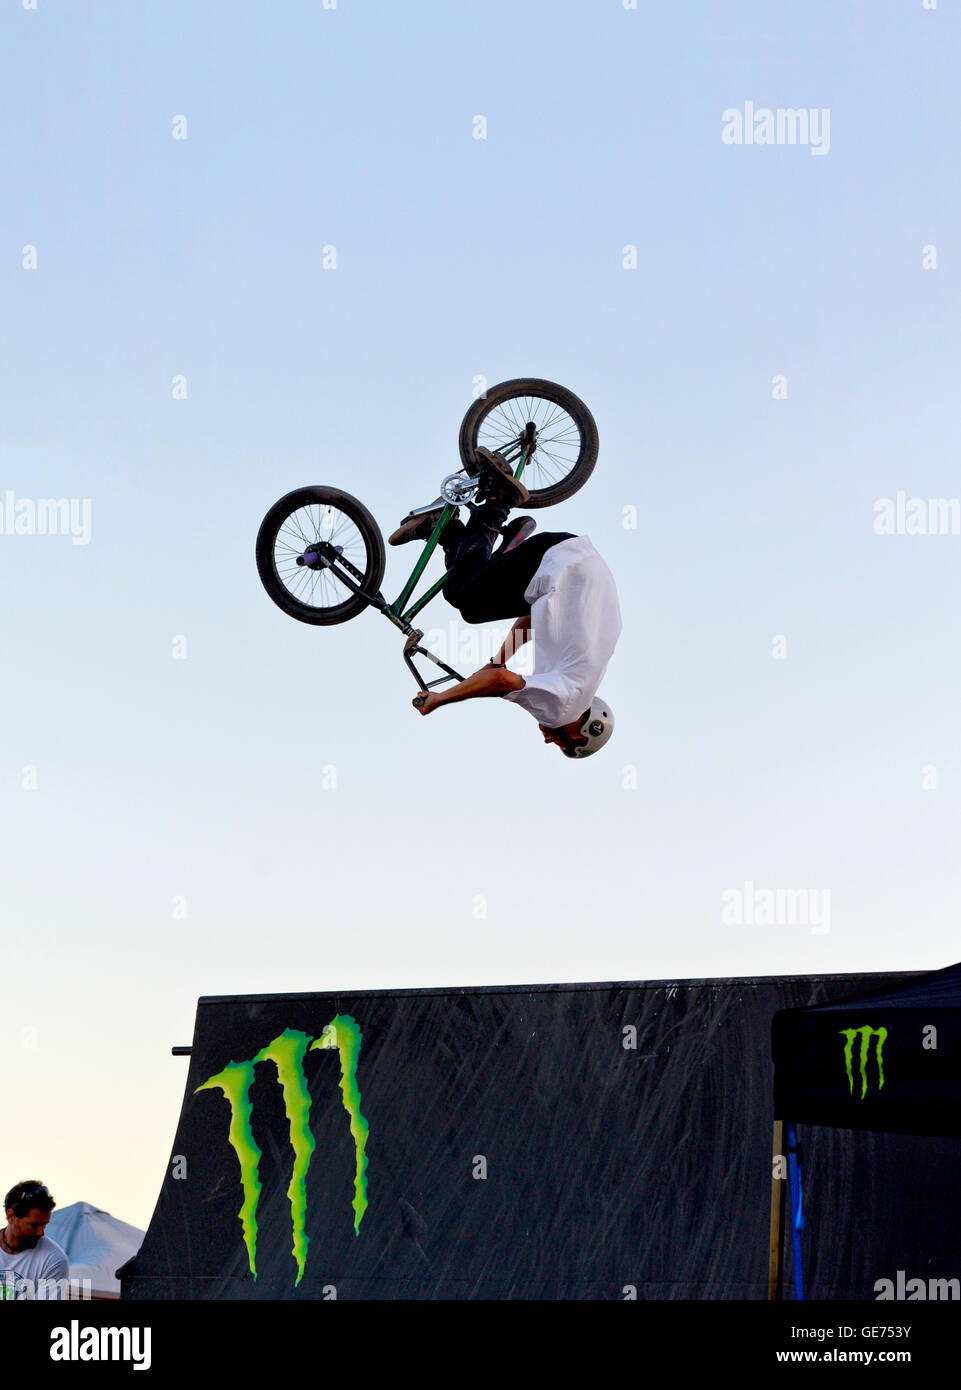 A person doing a back flip over a jump on a BMX bicycle Stock Photo